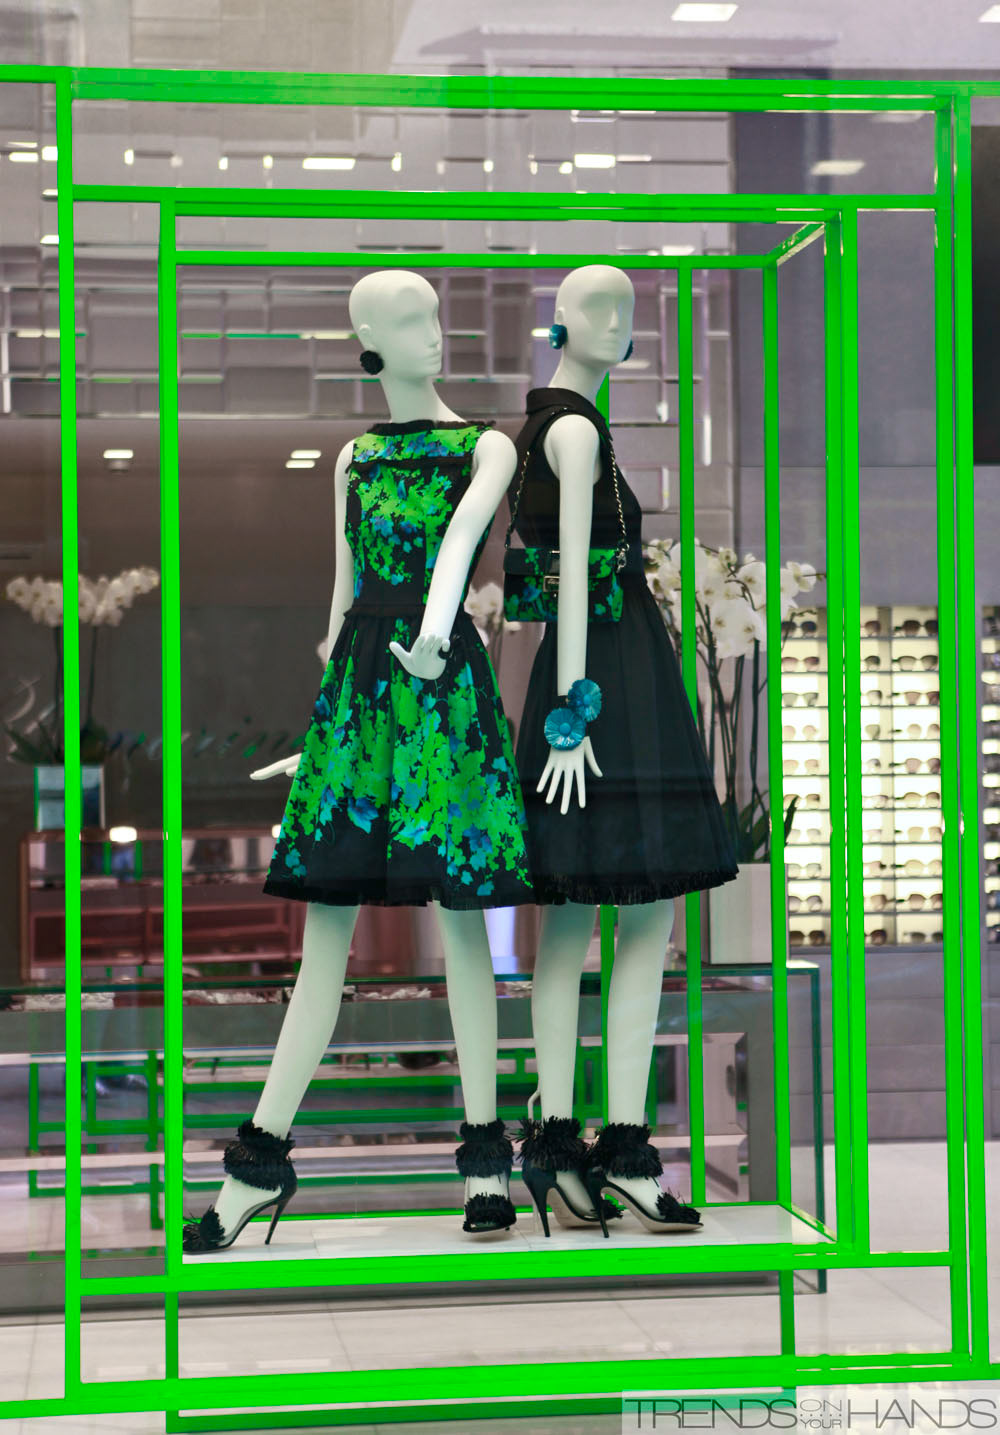 womenswear outfit shop windows Retail trends Trend spotting milan S/S 2012